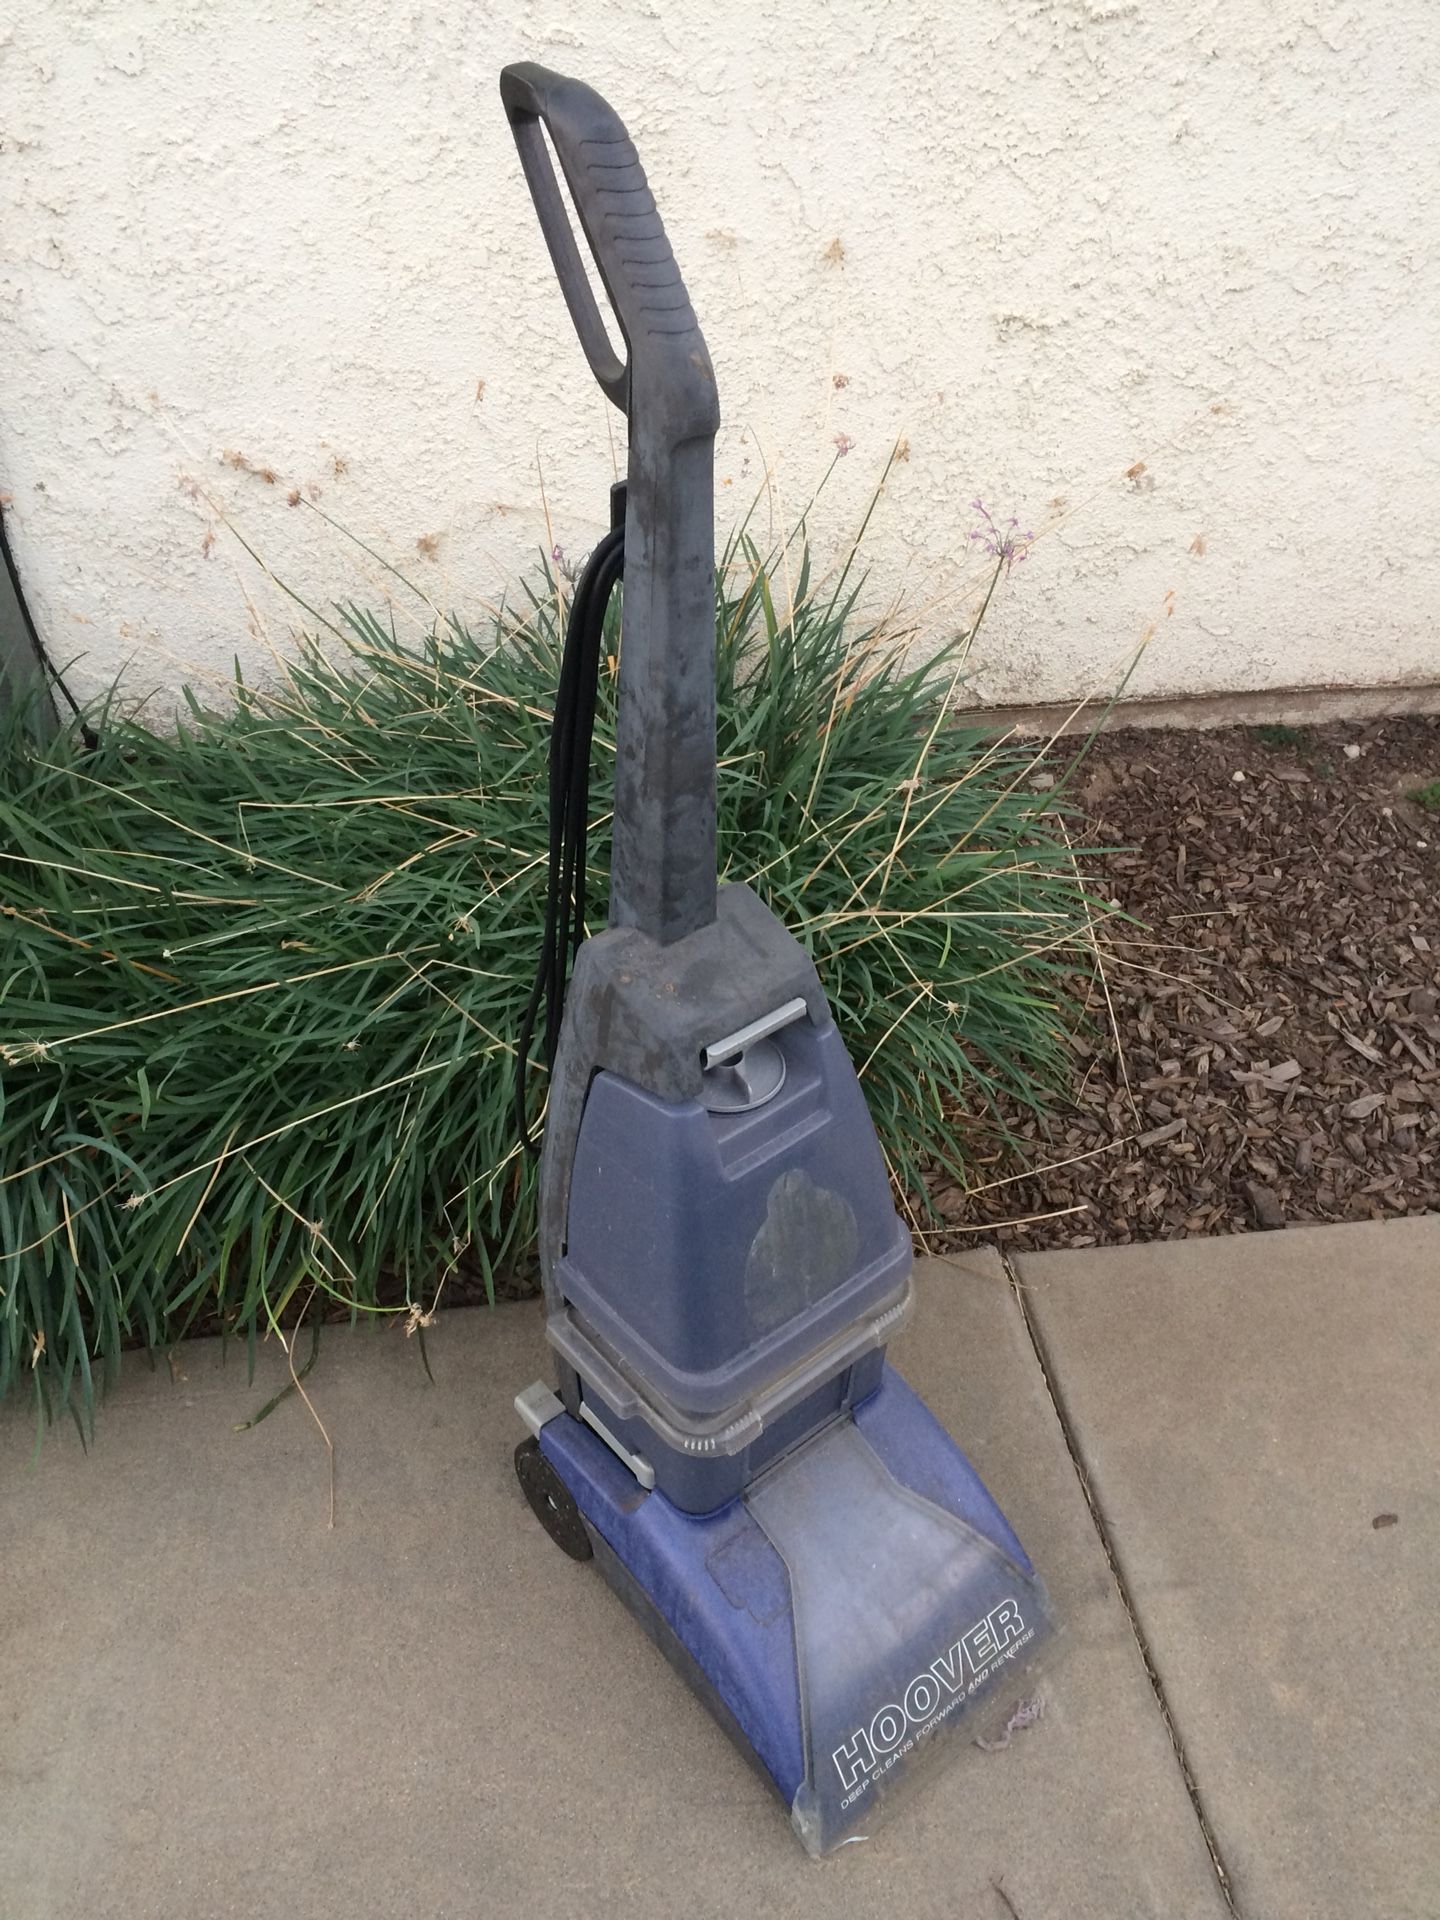 Hoover Carpet Cleaner Vacuum.. exterior discoloration, but works indeed